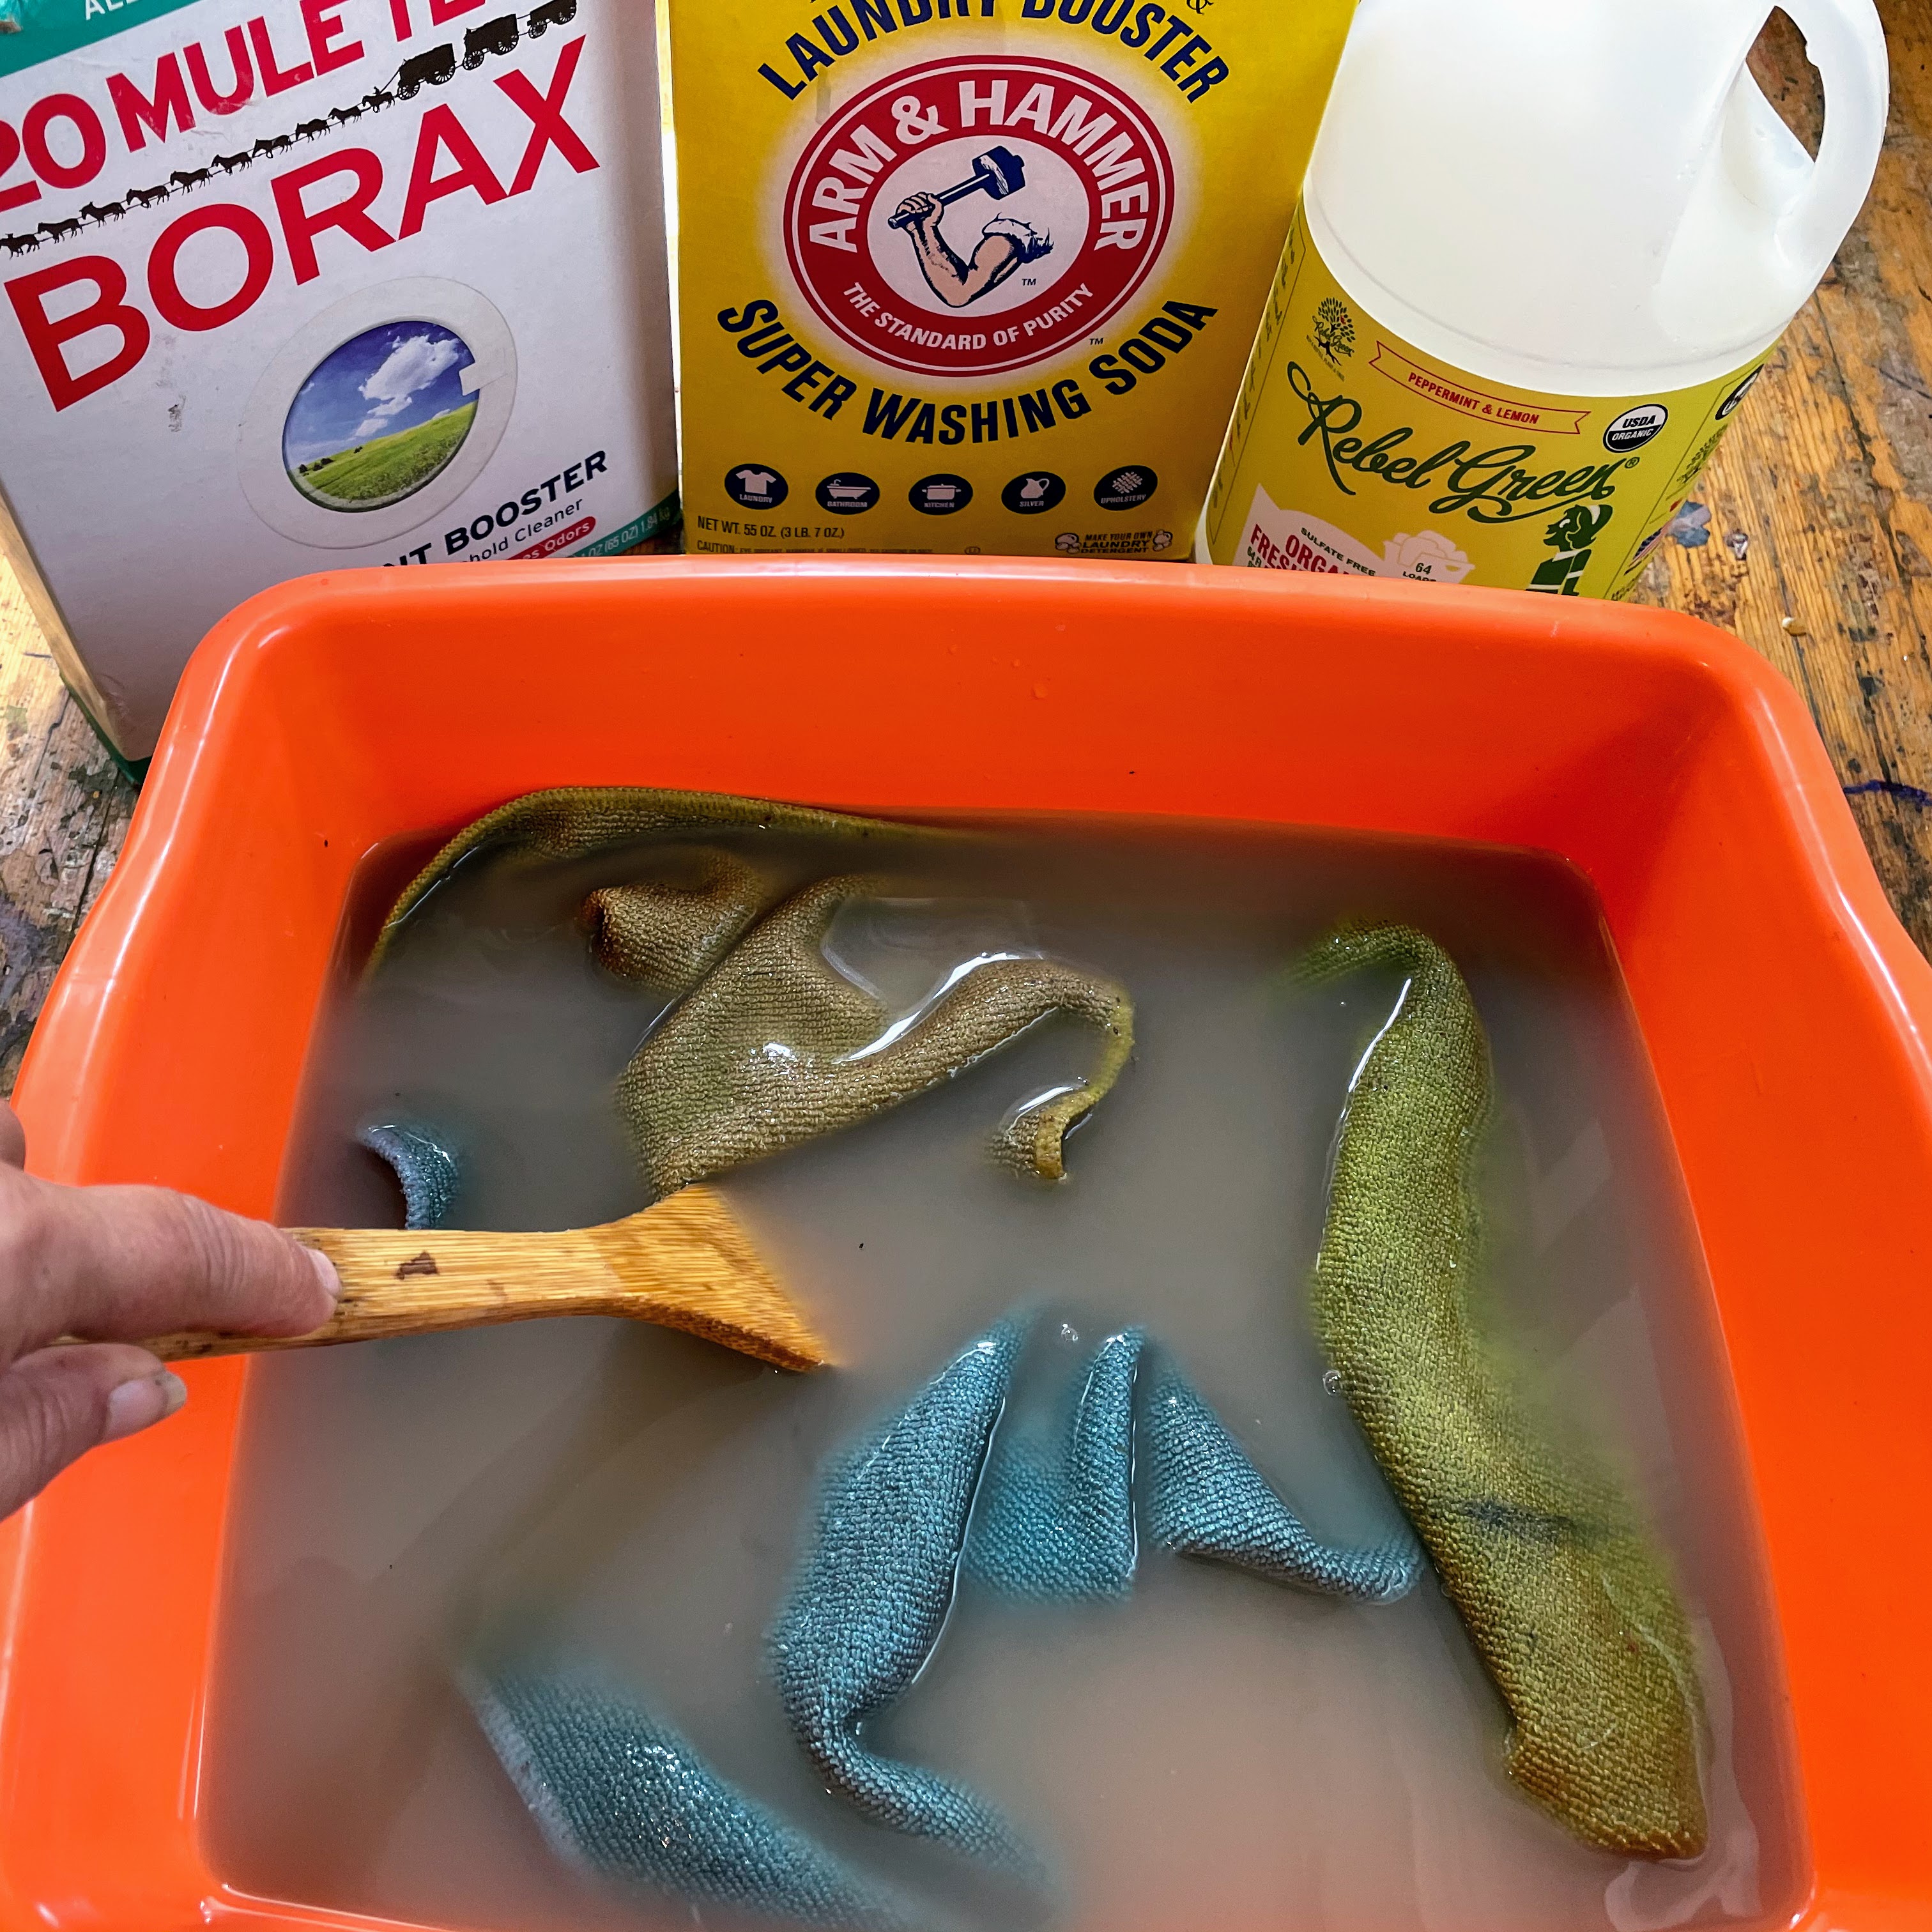 Getting to the Bottom of Borax: Is it Safe or Not?